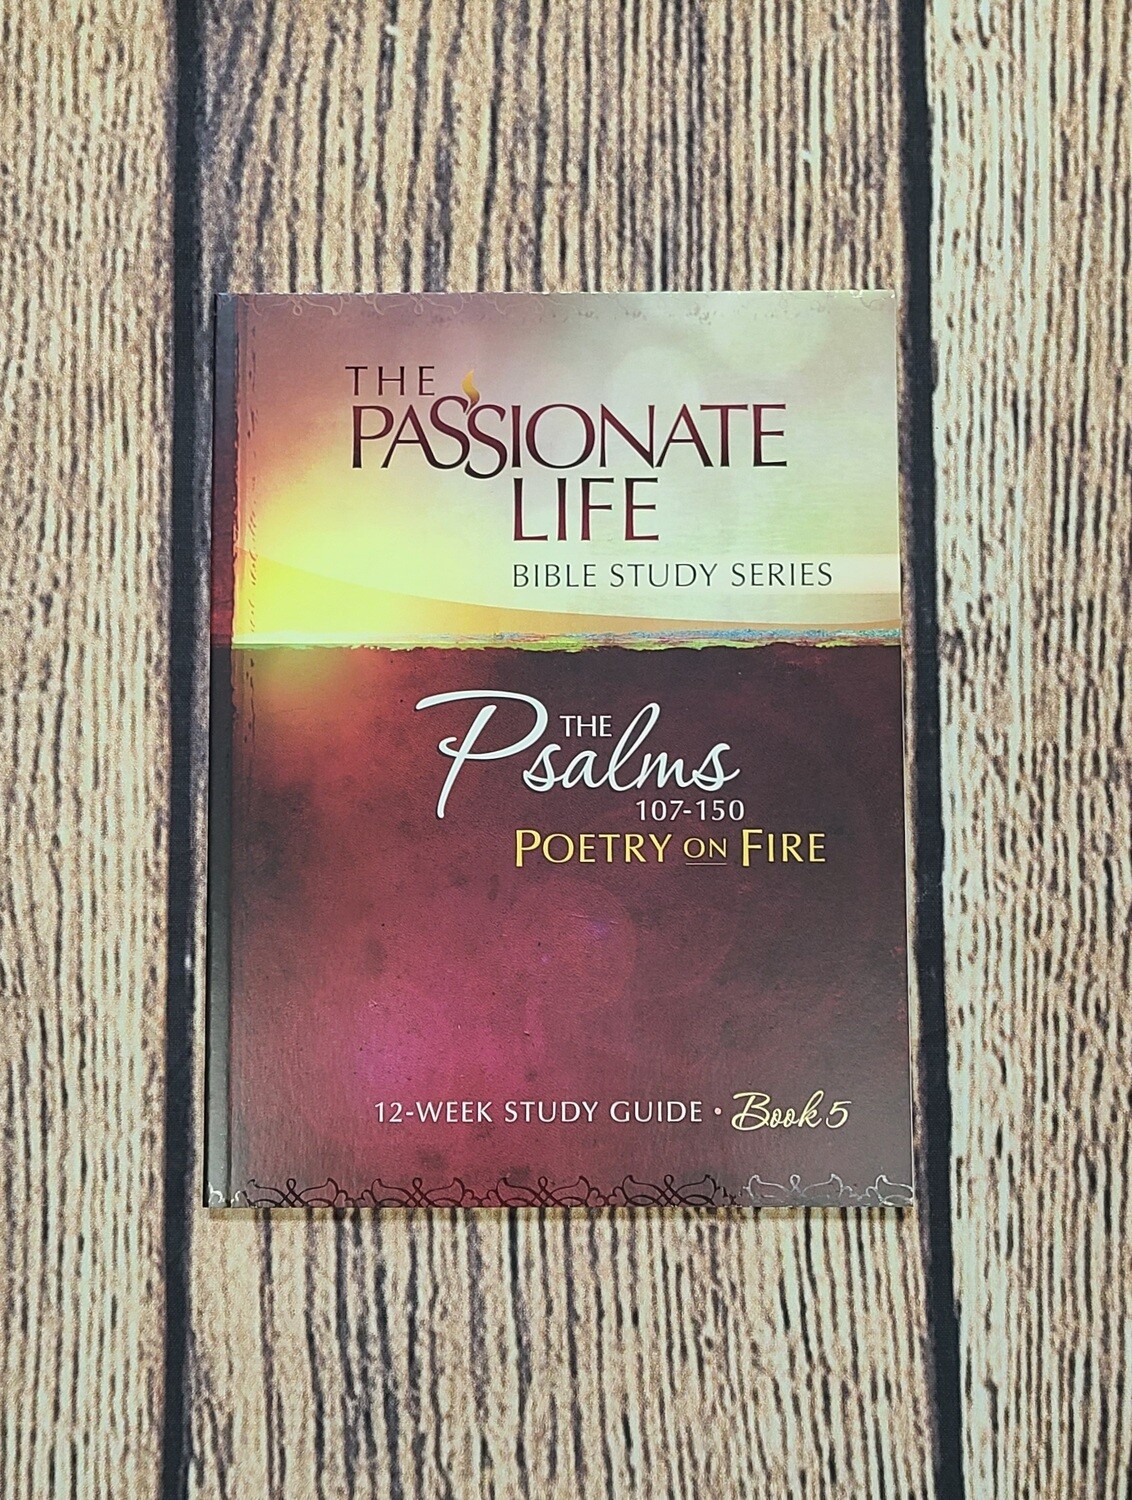 The Passionate Life Bible Study Series: The Psalmes 107-150 Poetry on Fire 12-Week Study Guide - Book 5 by Jeremy Bouma